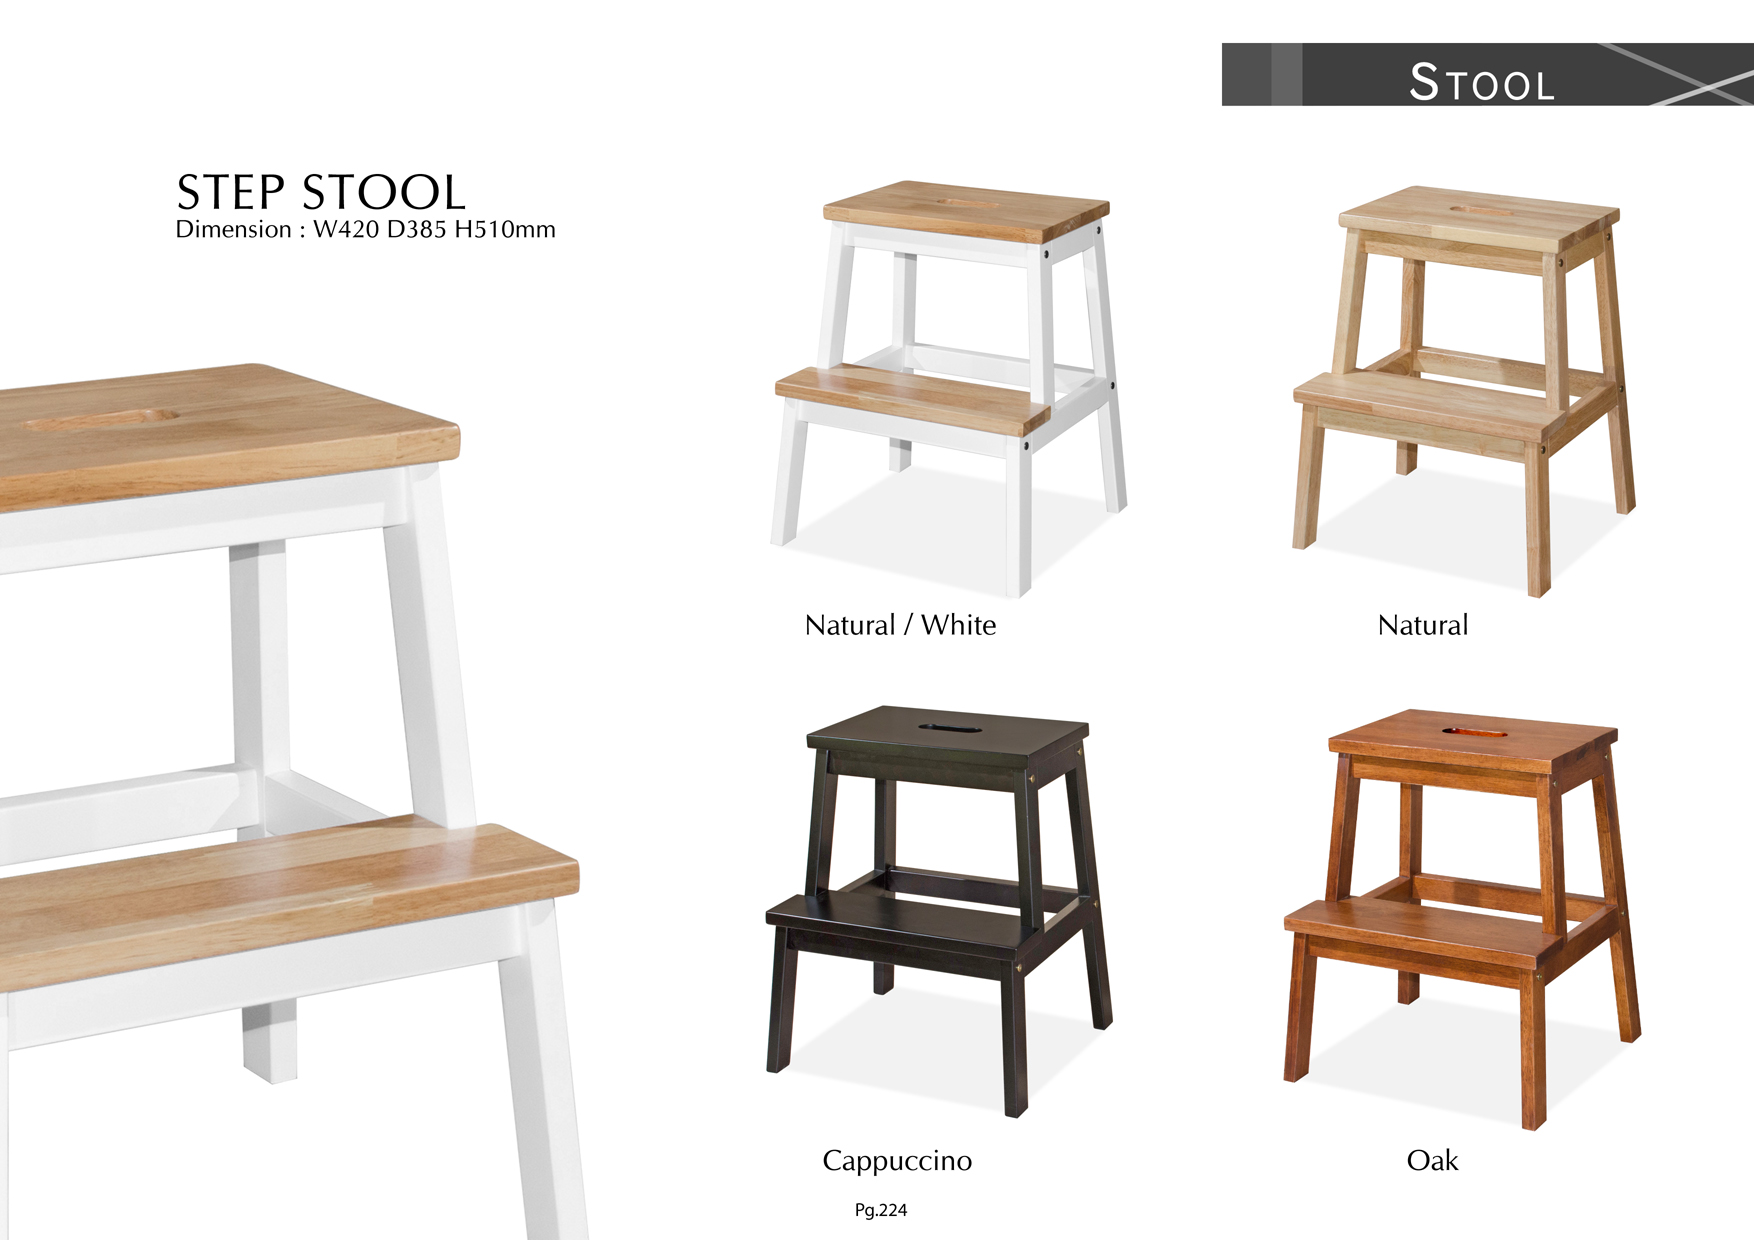 Product: PG224. STEP STOOL